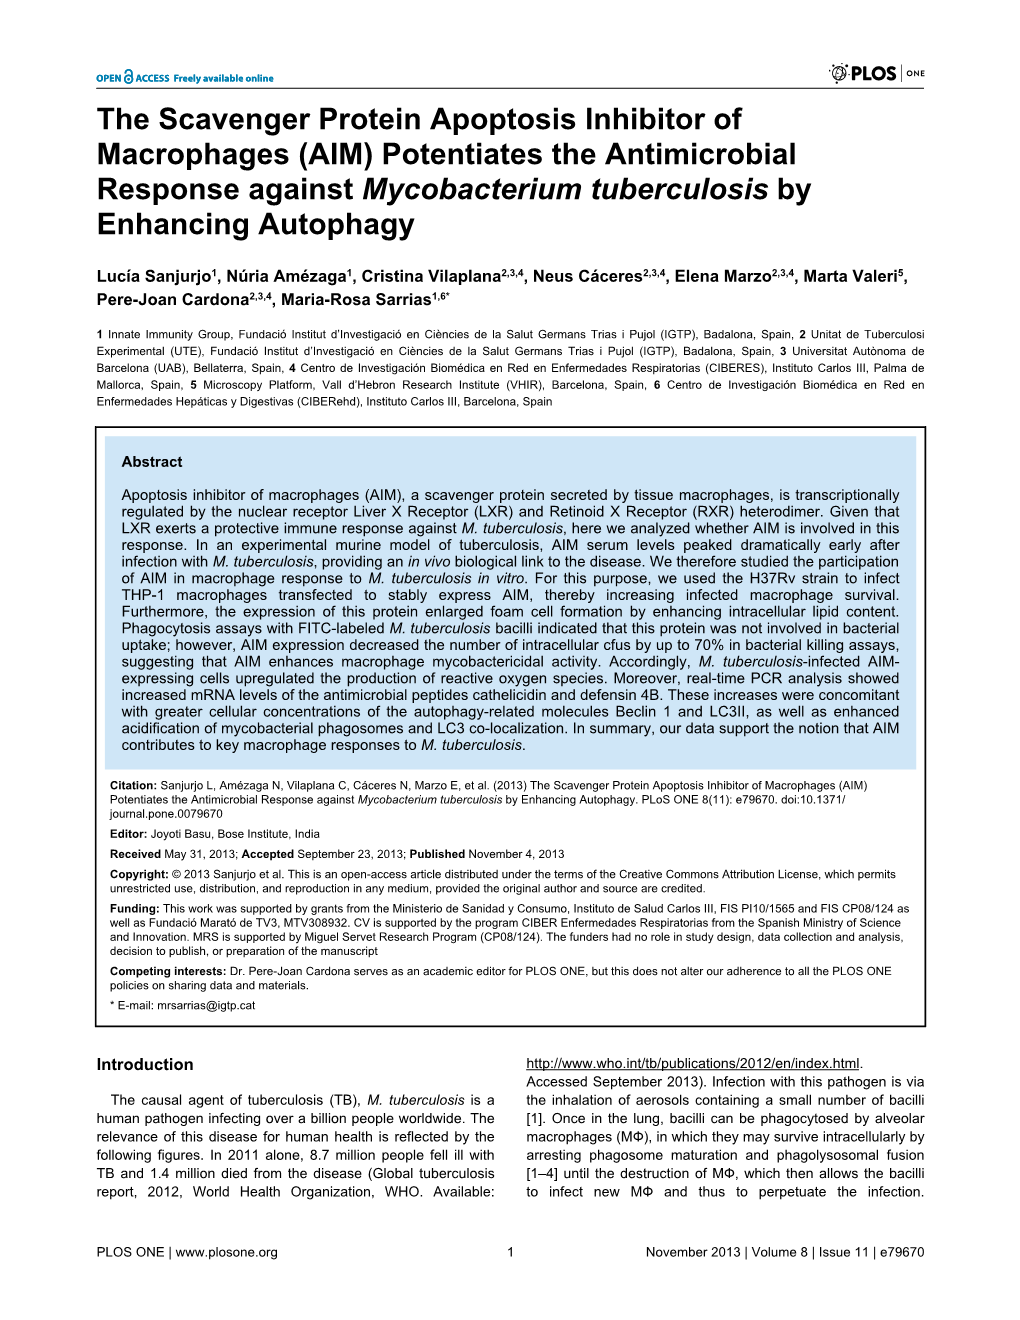 The Scavenger Protein Apoptosis Inhibitor of Macrophages (AIM) Potentiates the Antimicrobial Response Against Mycobacterium Tuberculosis by Enhancing Autophagy